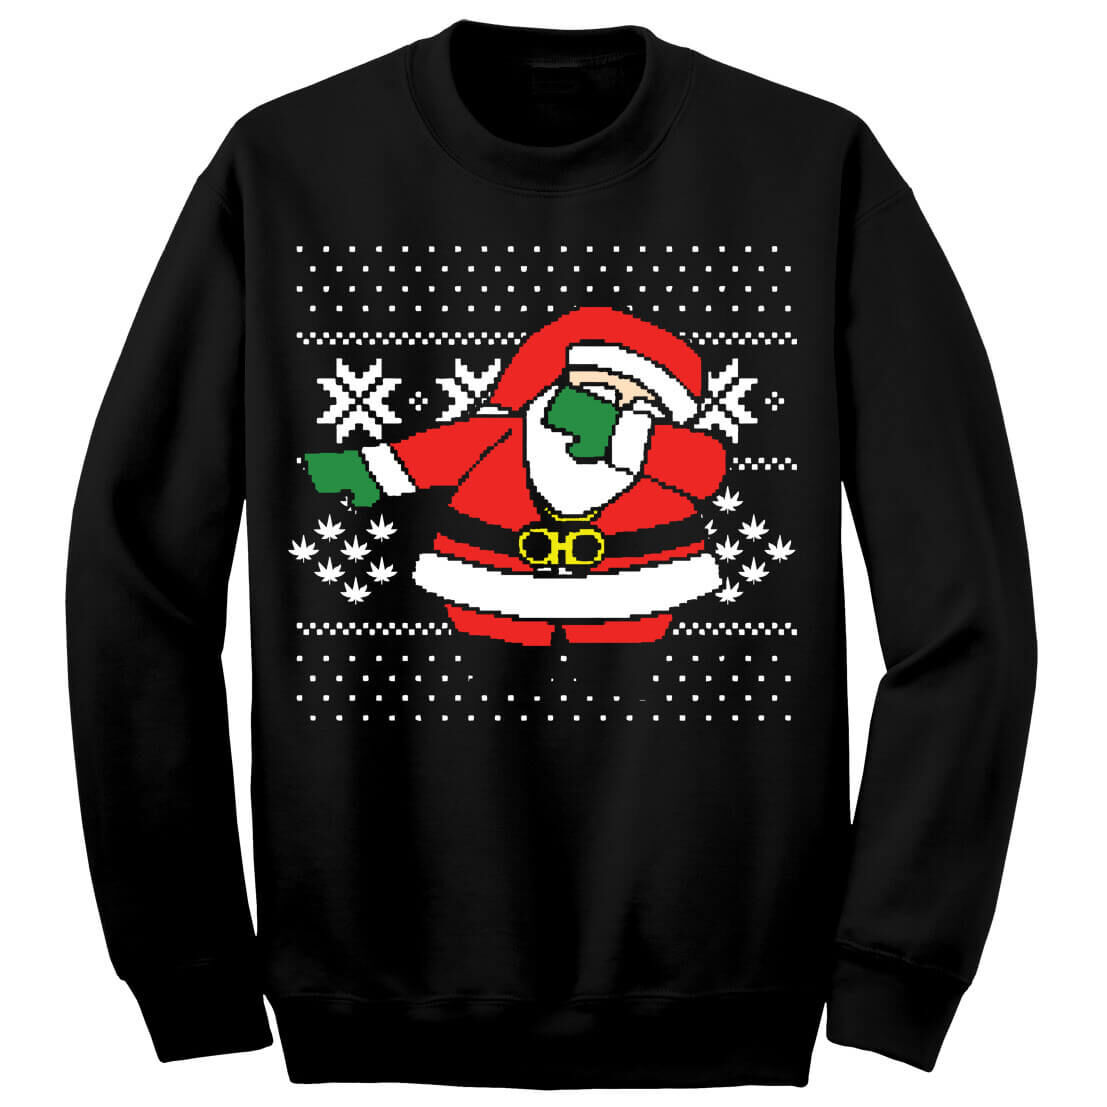 The Coolest, Geekiest “Ugly Sweaters” to Wear This Holiday Season | Fandom